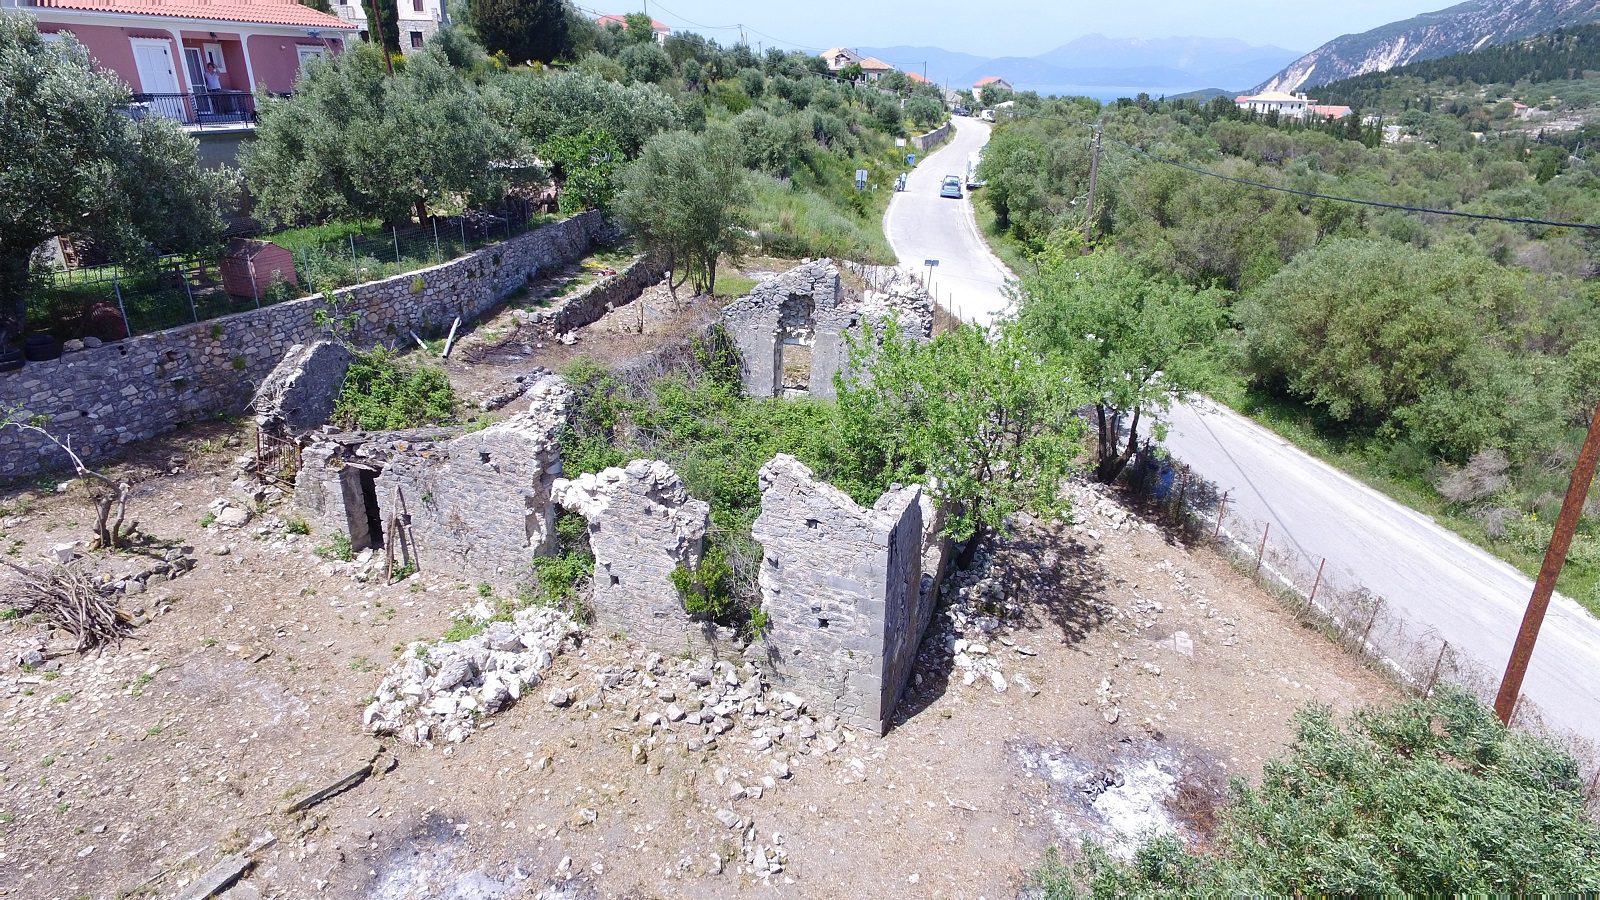 Aerial view and border of land for sale Ithaca Greece, Ag Saranda